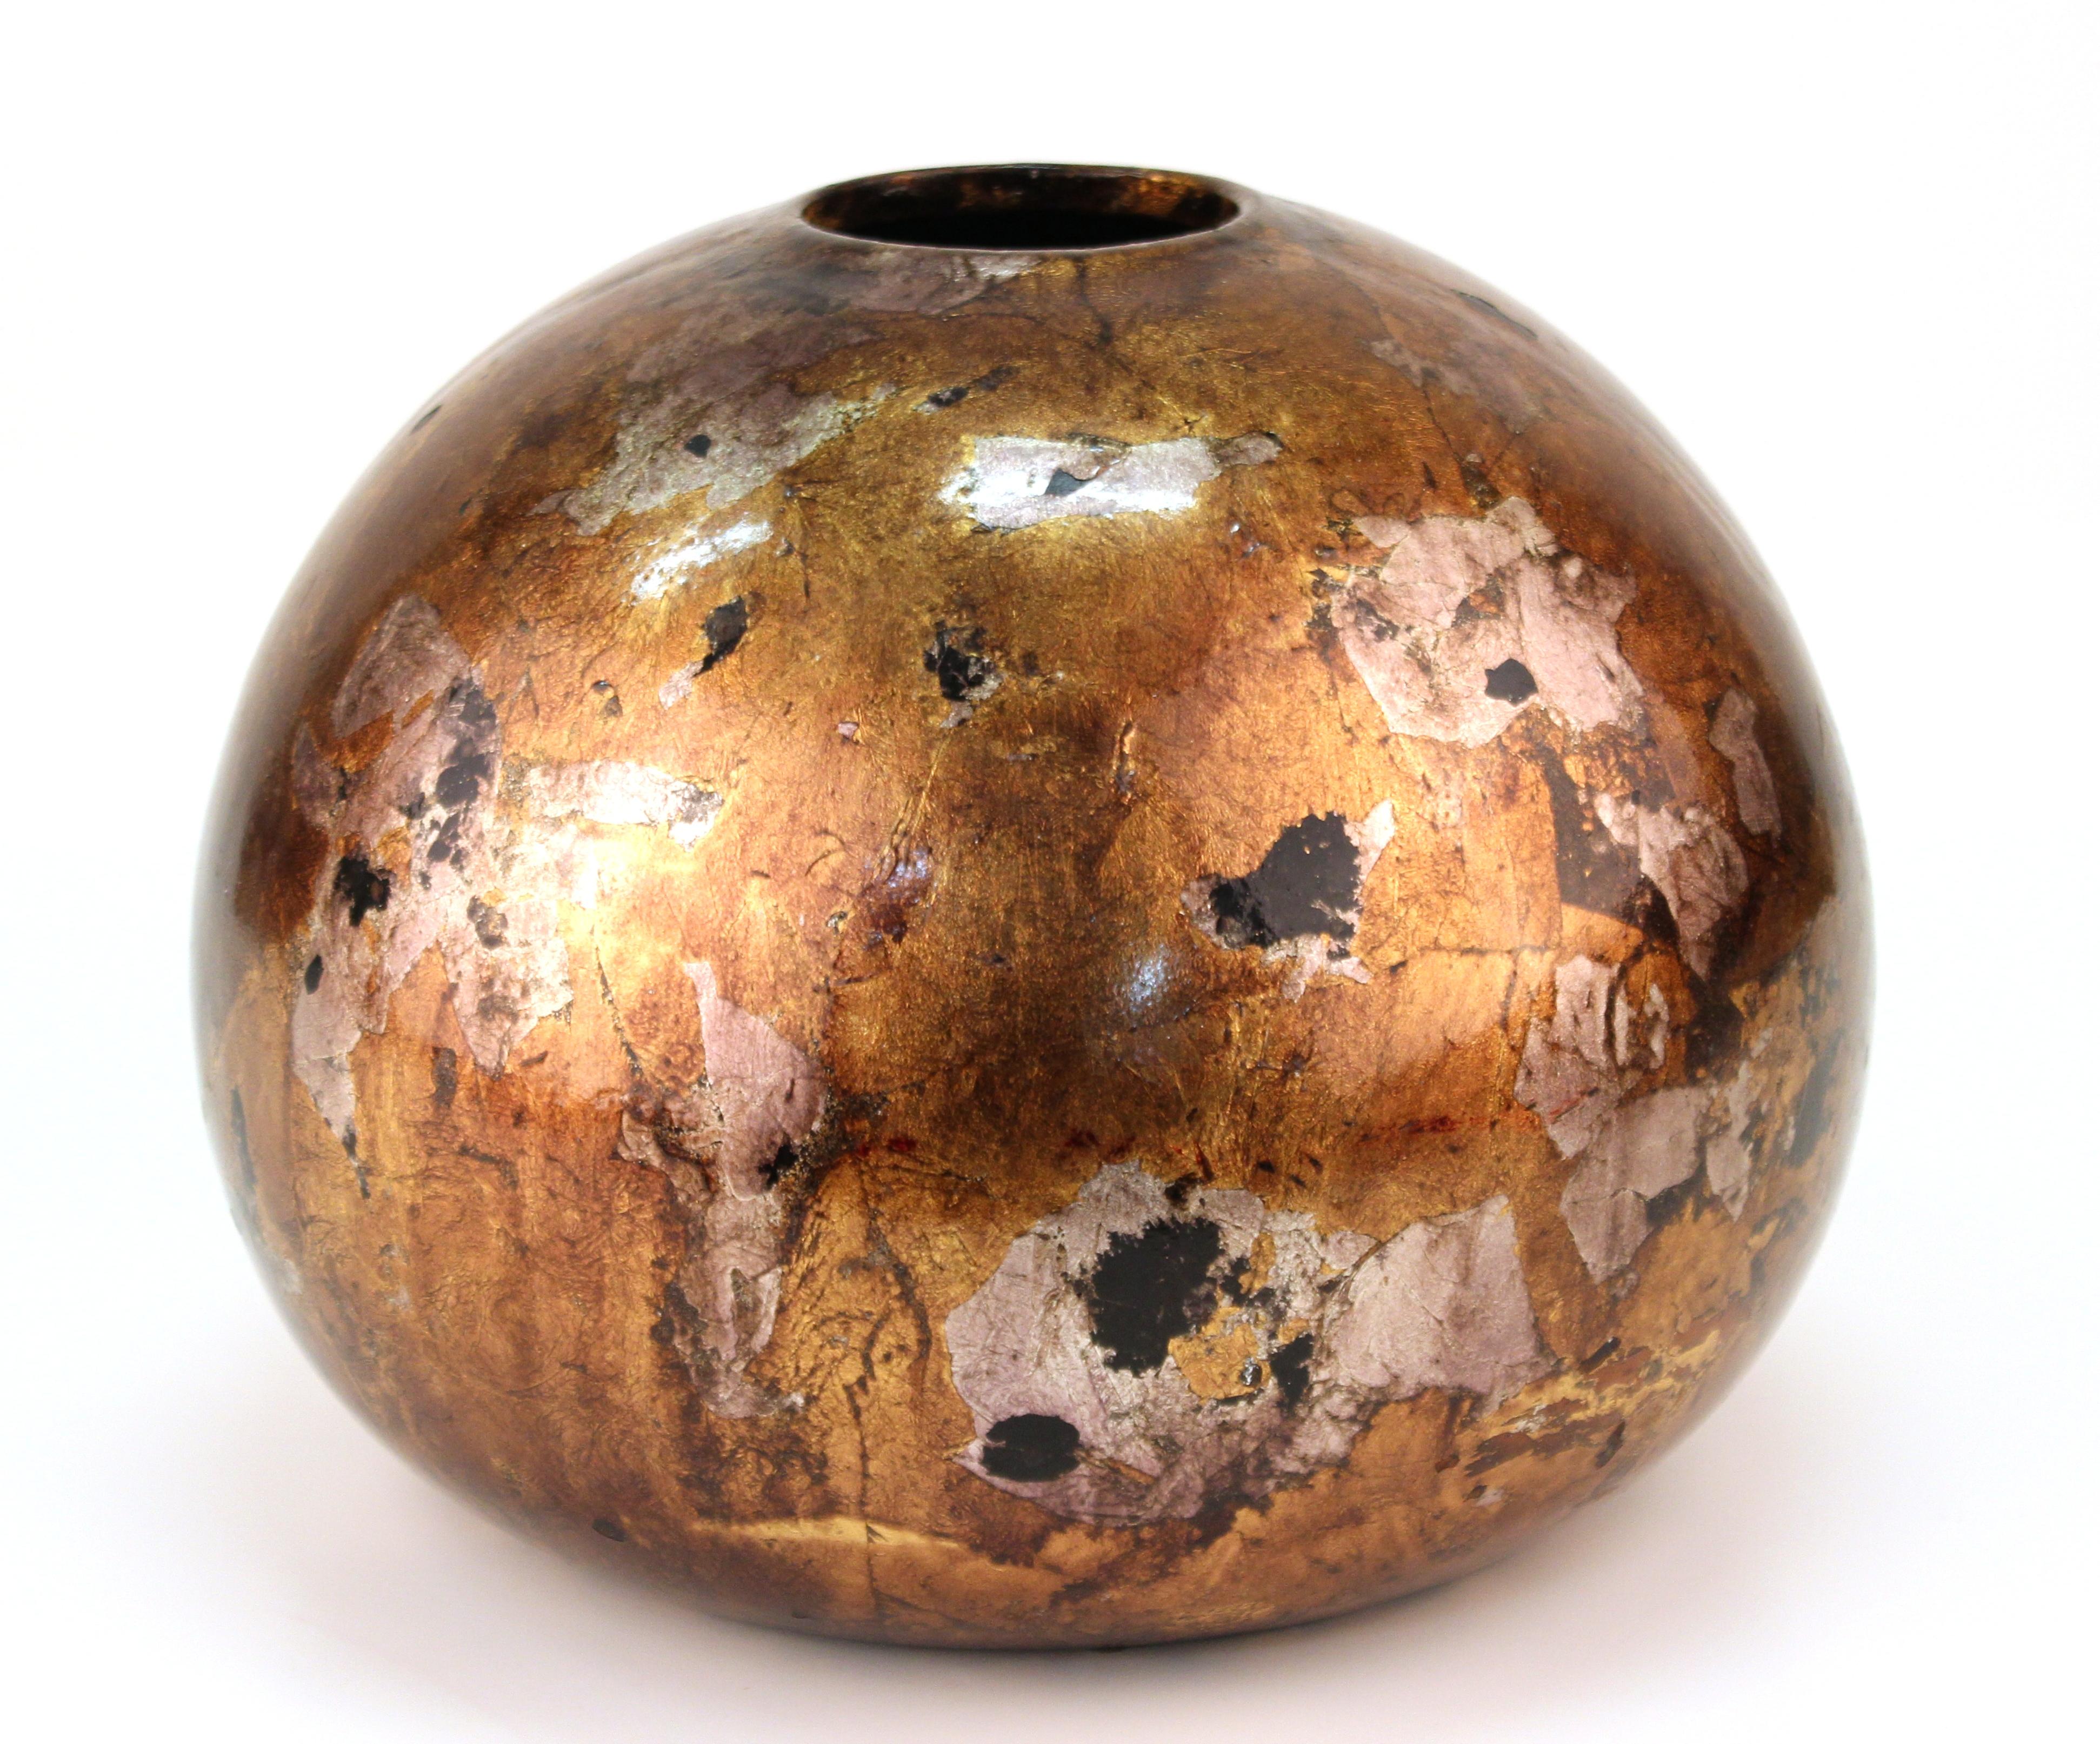 Modern studio ceramic art bulb-shaped vase with inclusions of gold and silver foil. The piece is unmarked on the bottom and in great vintage condition.